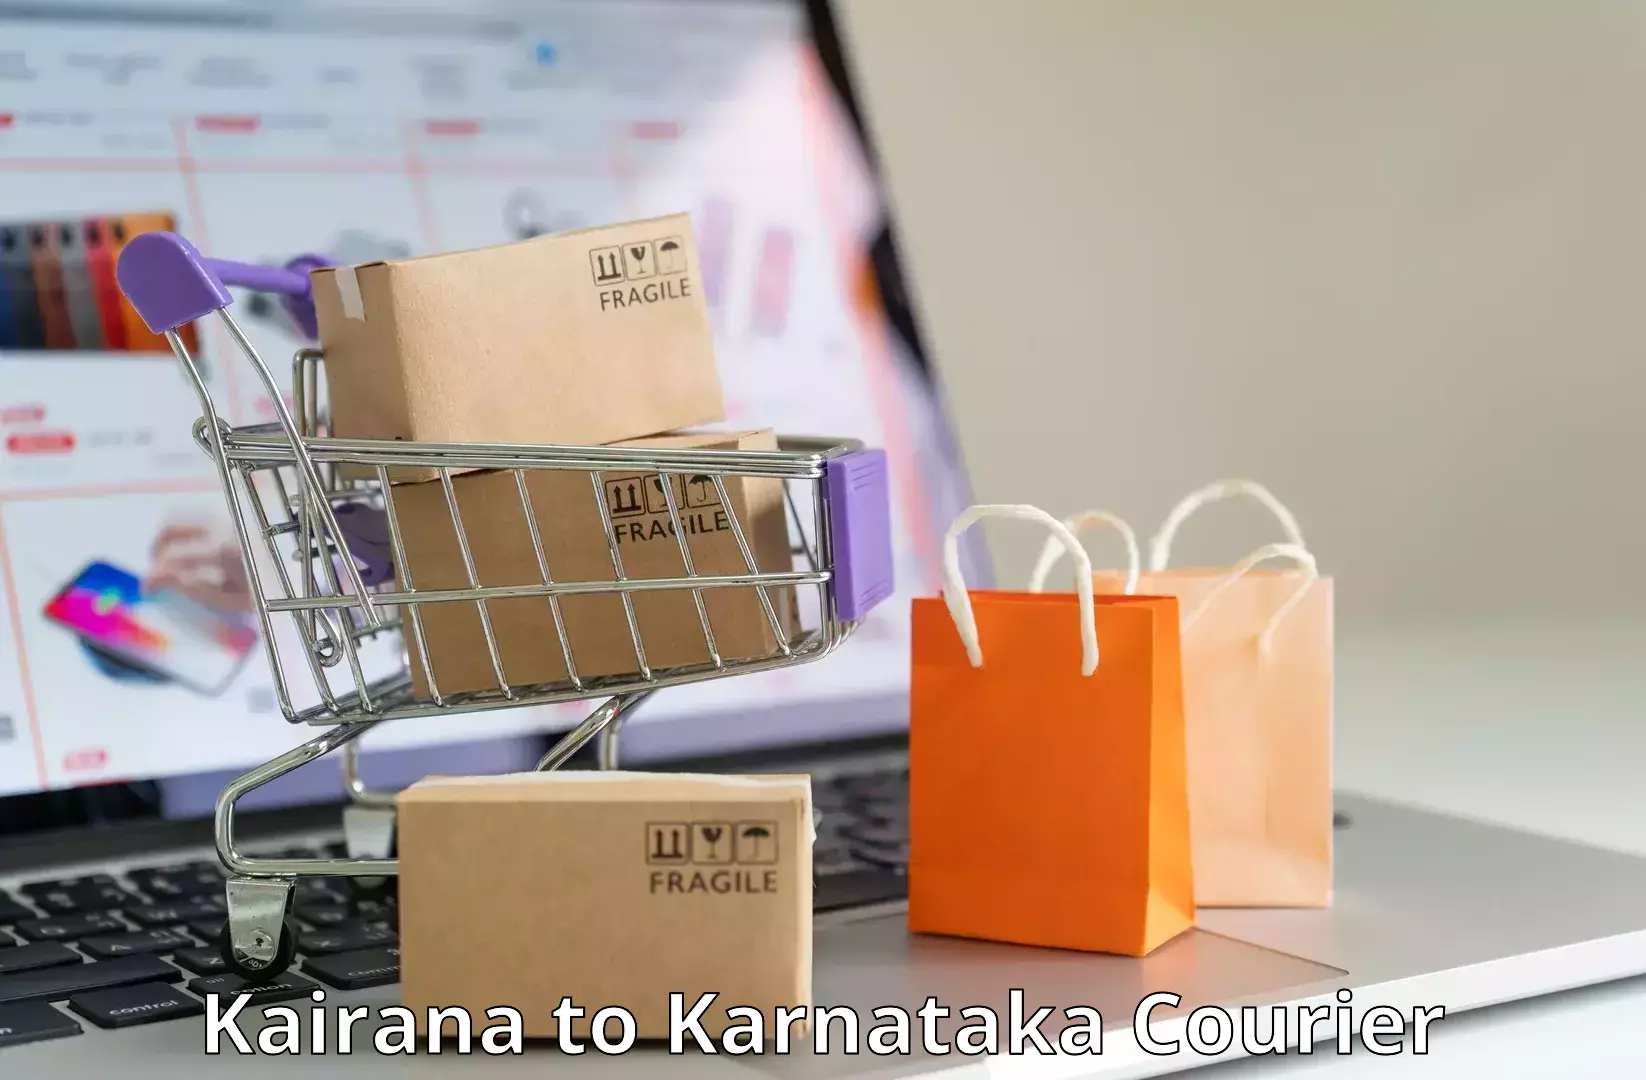 International courier networks Kairana to Mulbagal